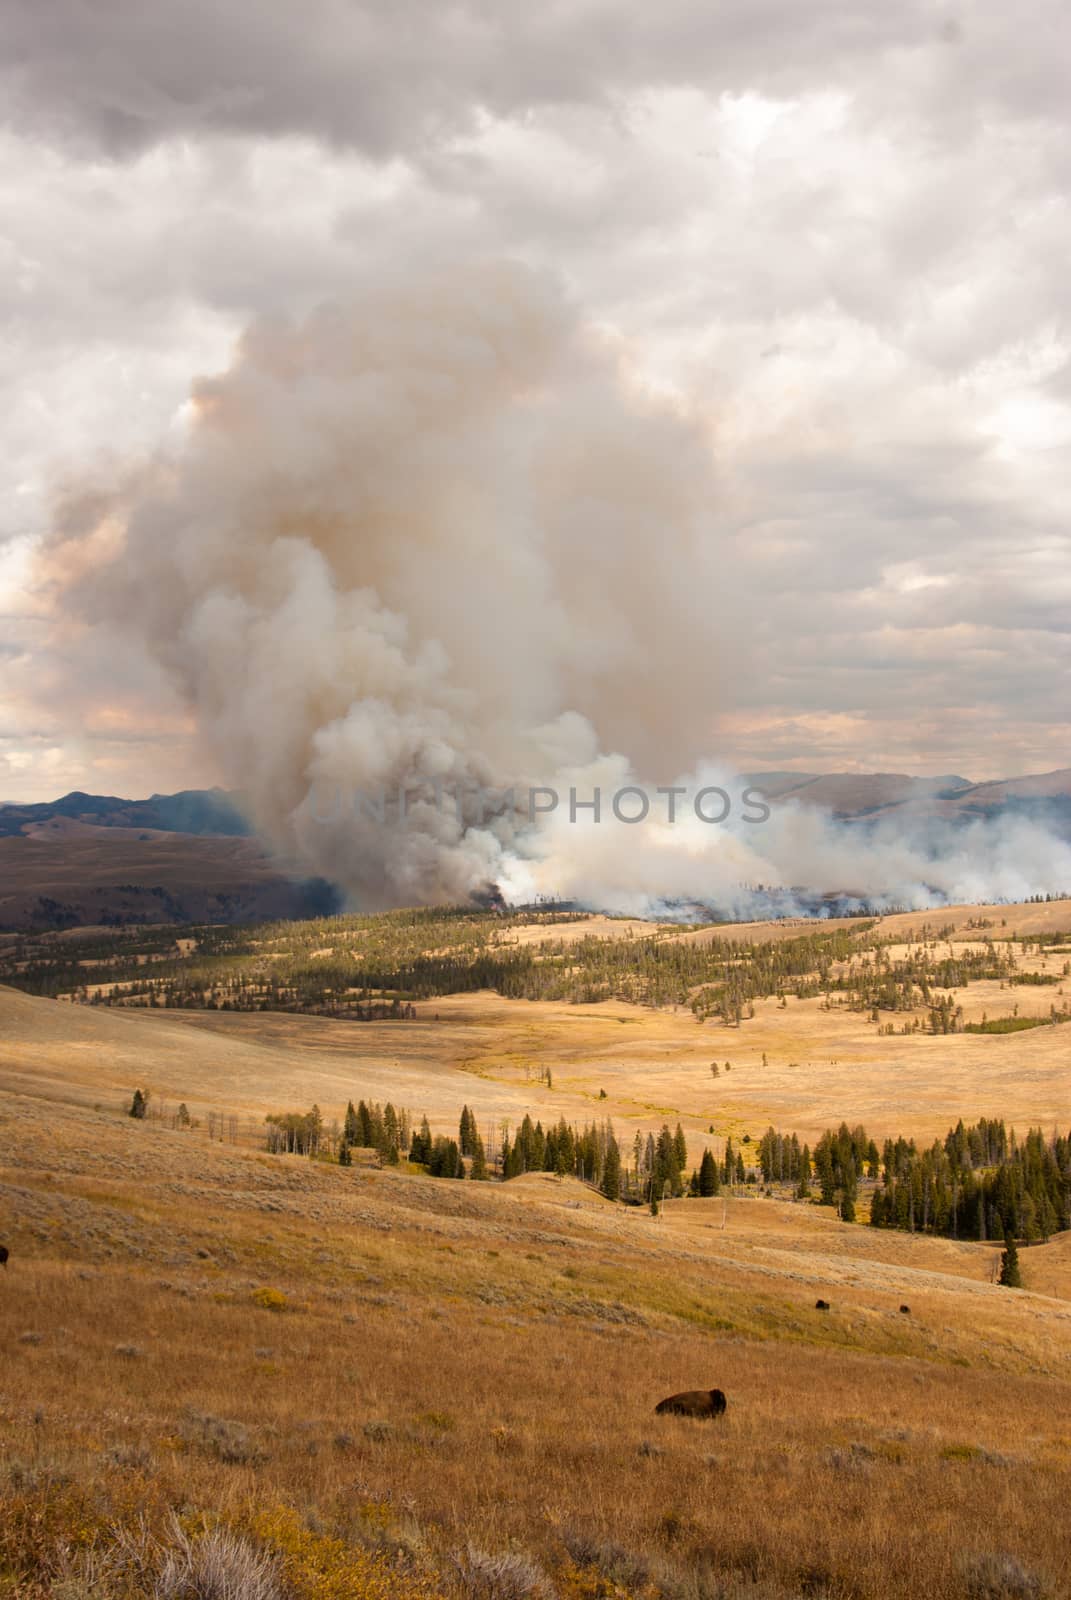 Trees ablaze while bison watch in Yellowstone by emattil